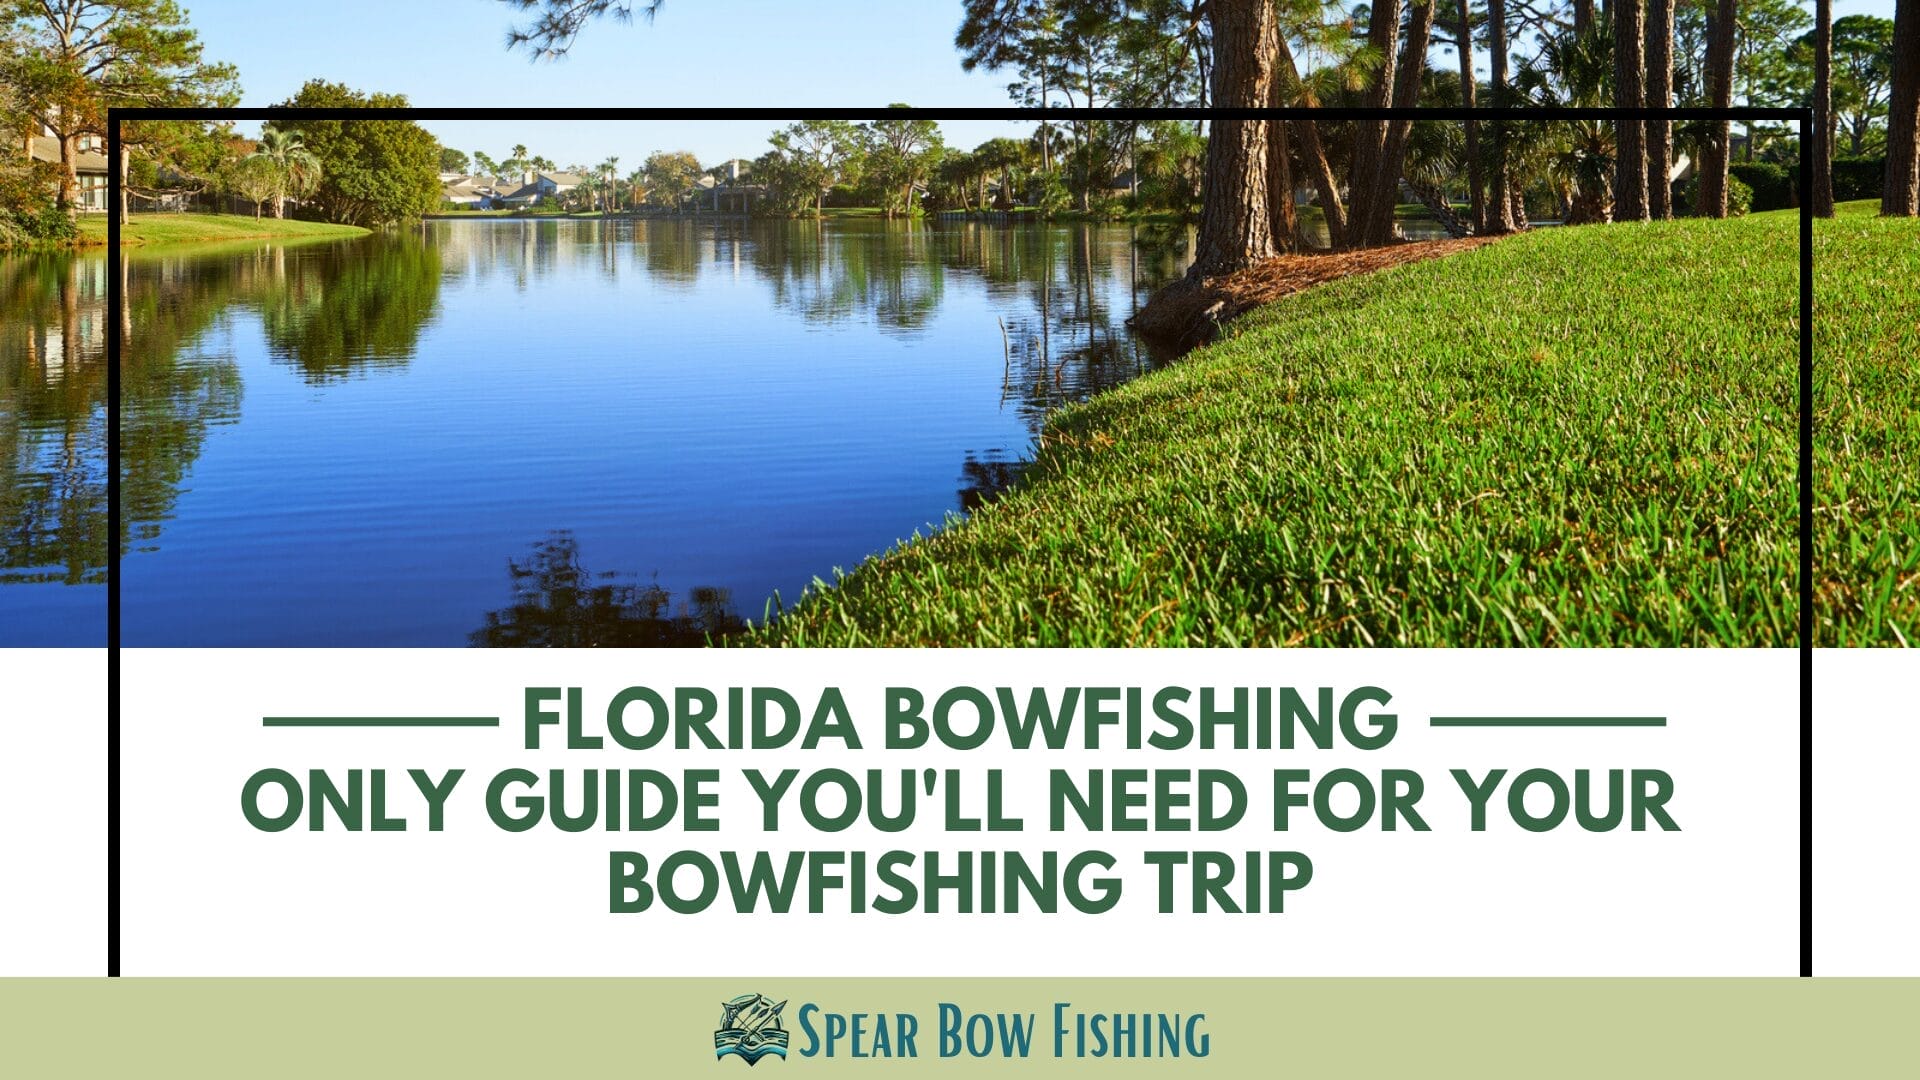 Florida Bowfishing Only Guide You'll Need for Your Bowfishing Trip